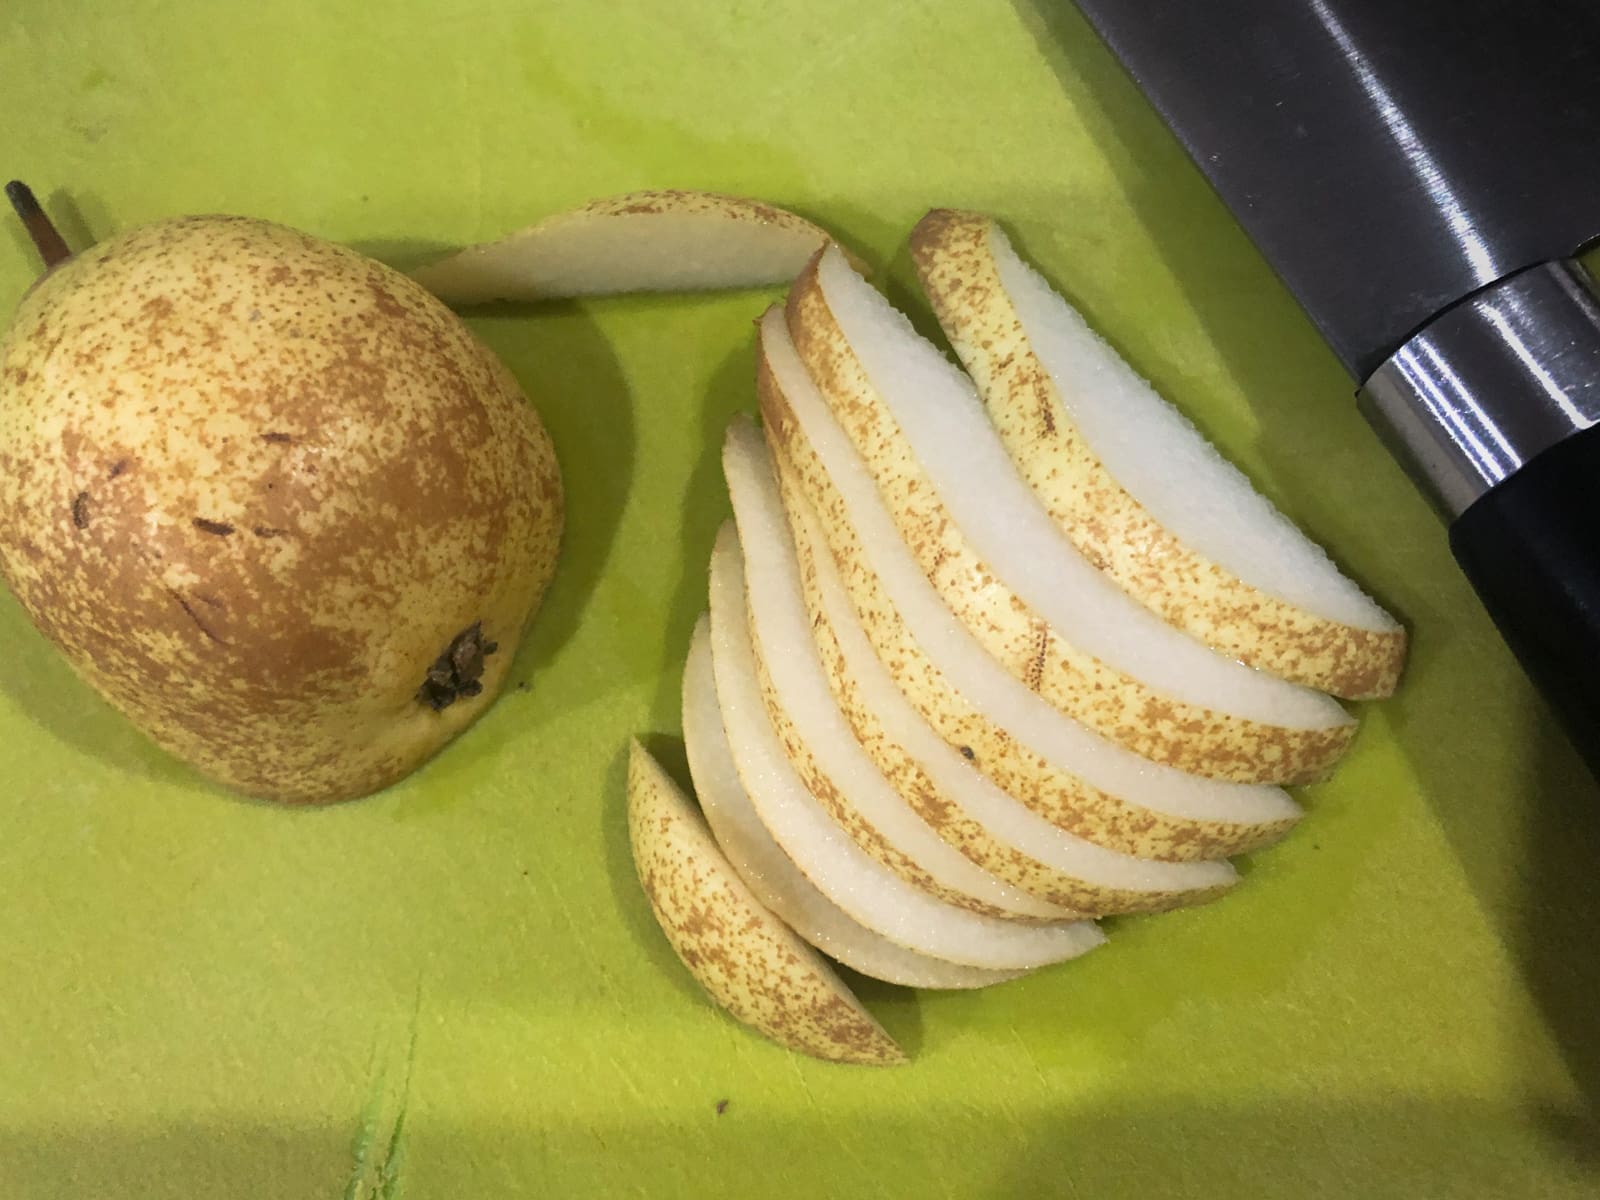 A pear sliced lengthways on a green chopping board before being added to a salad.